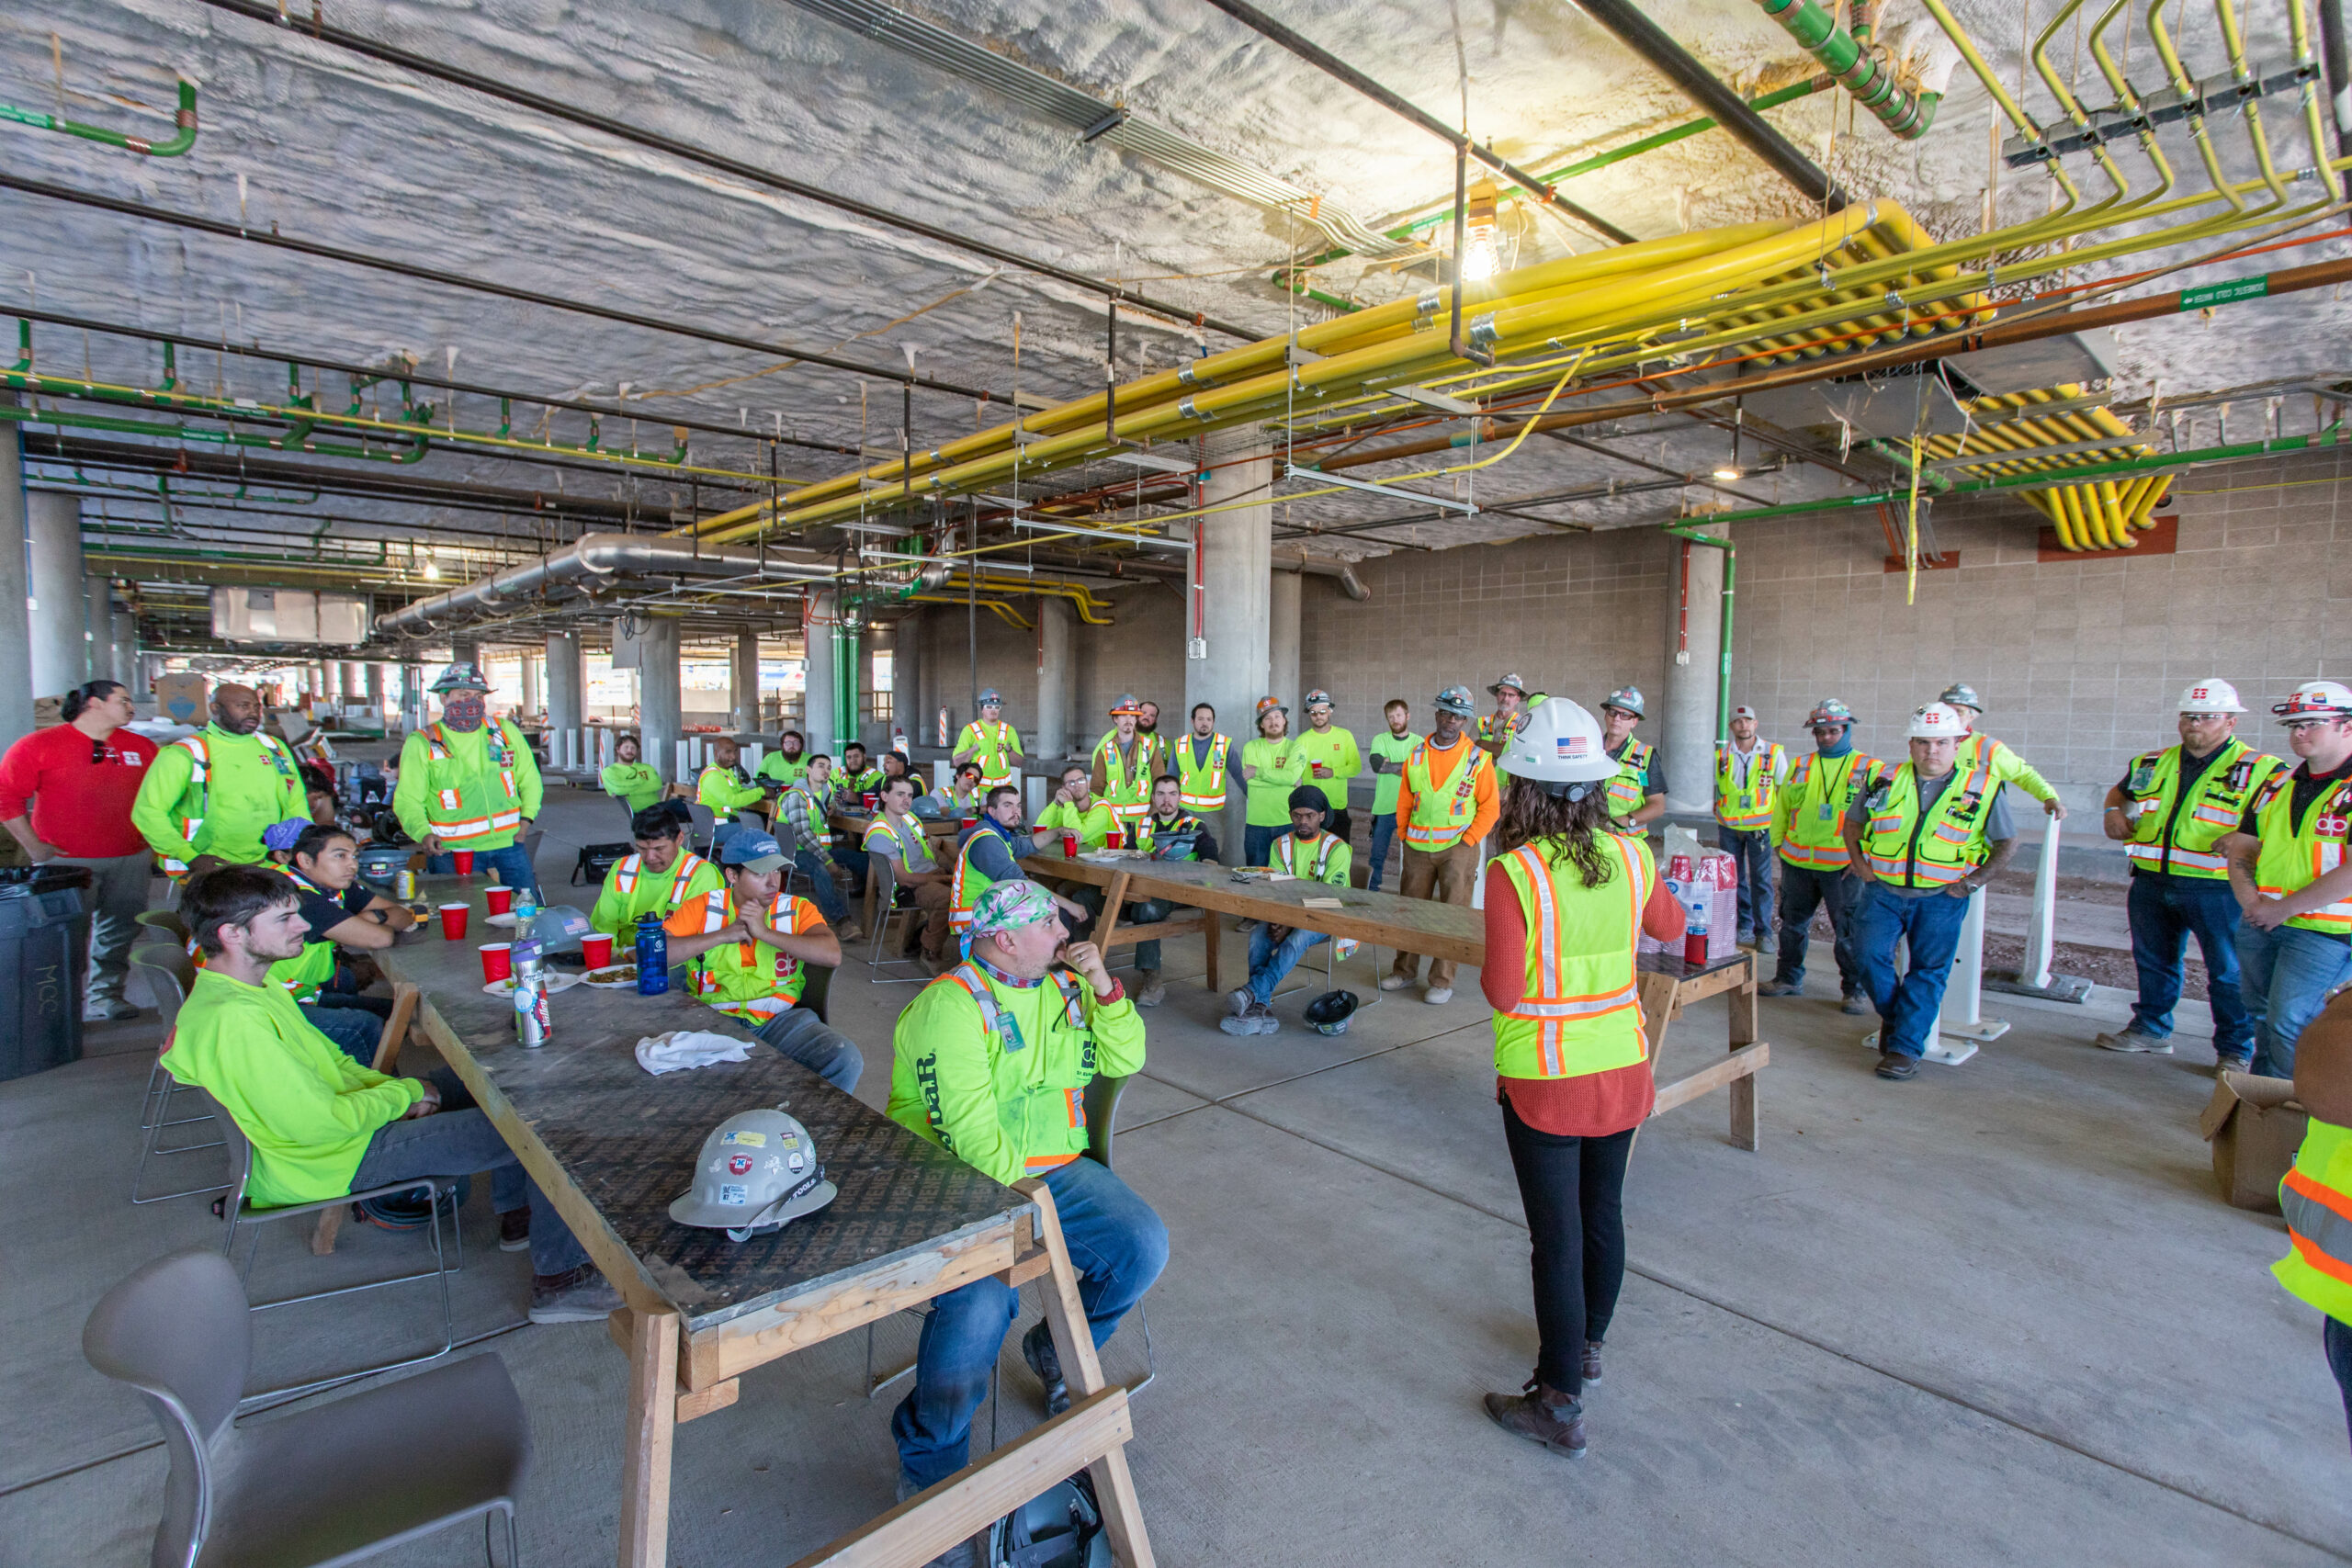 A group of construction workers, including Danielle, standing in a room.